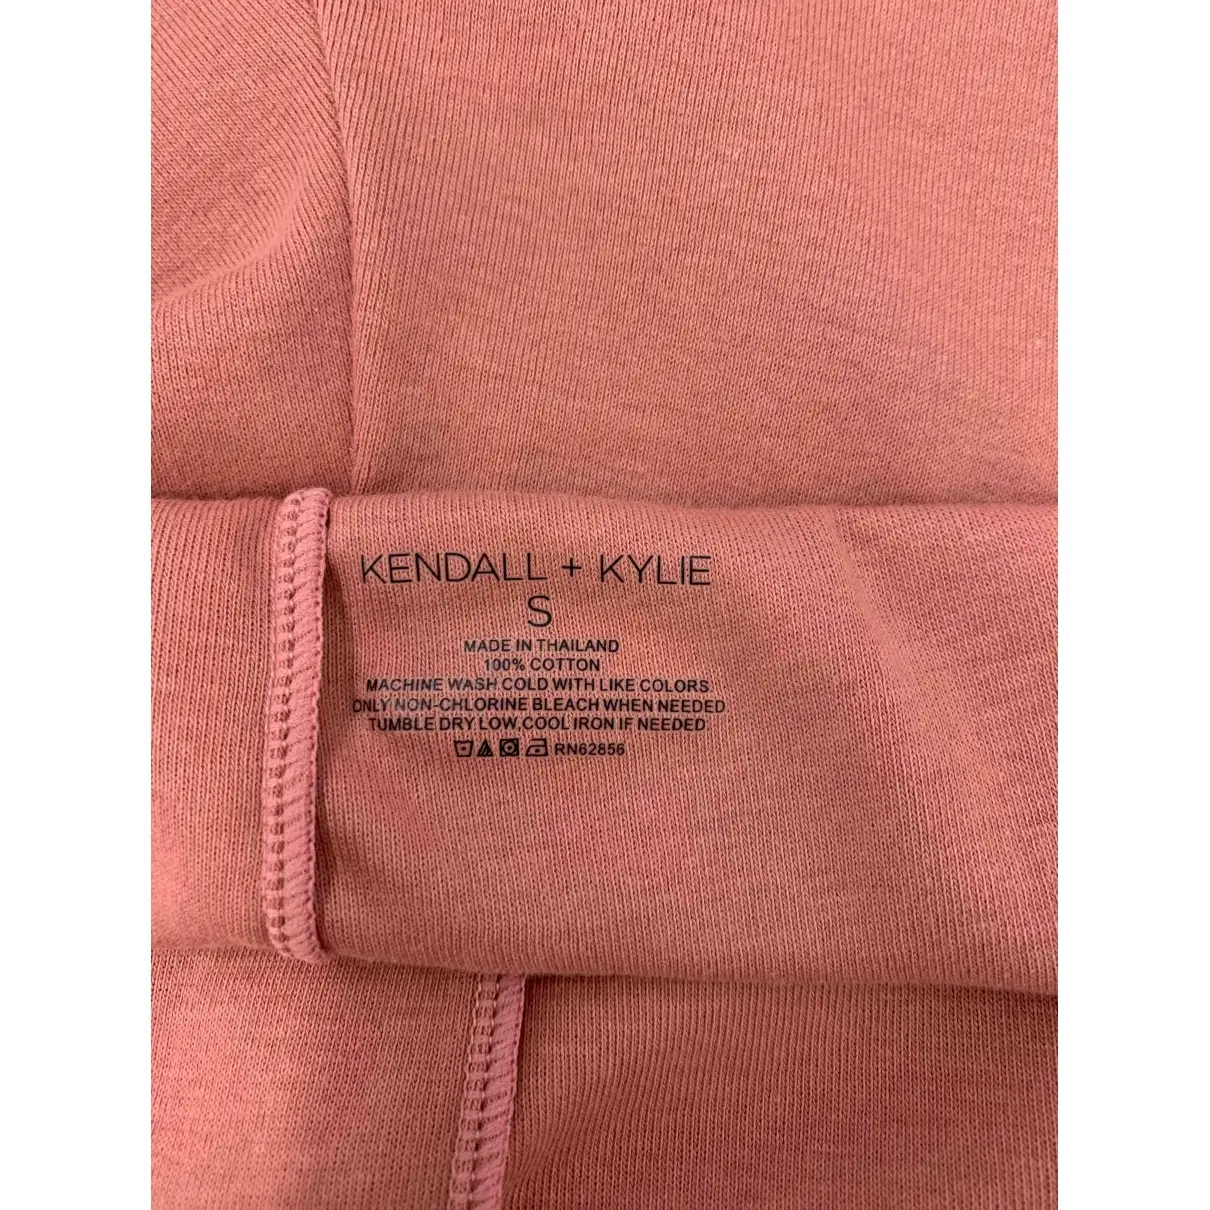 Buy Kendall + Kylie Pink Cotton Shorts online